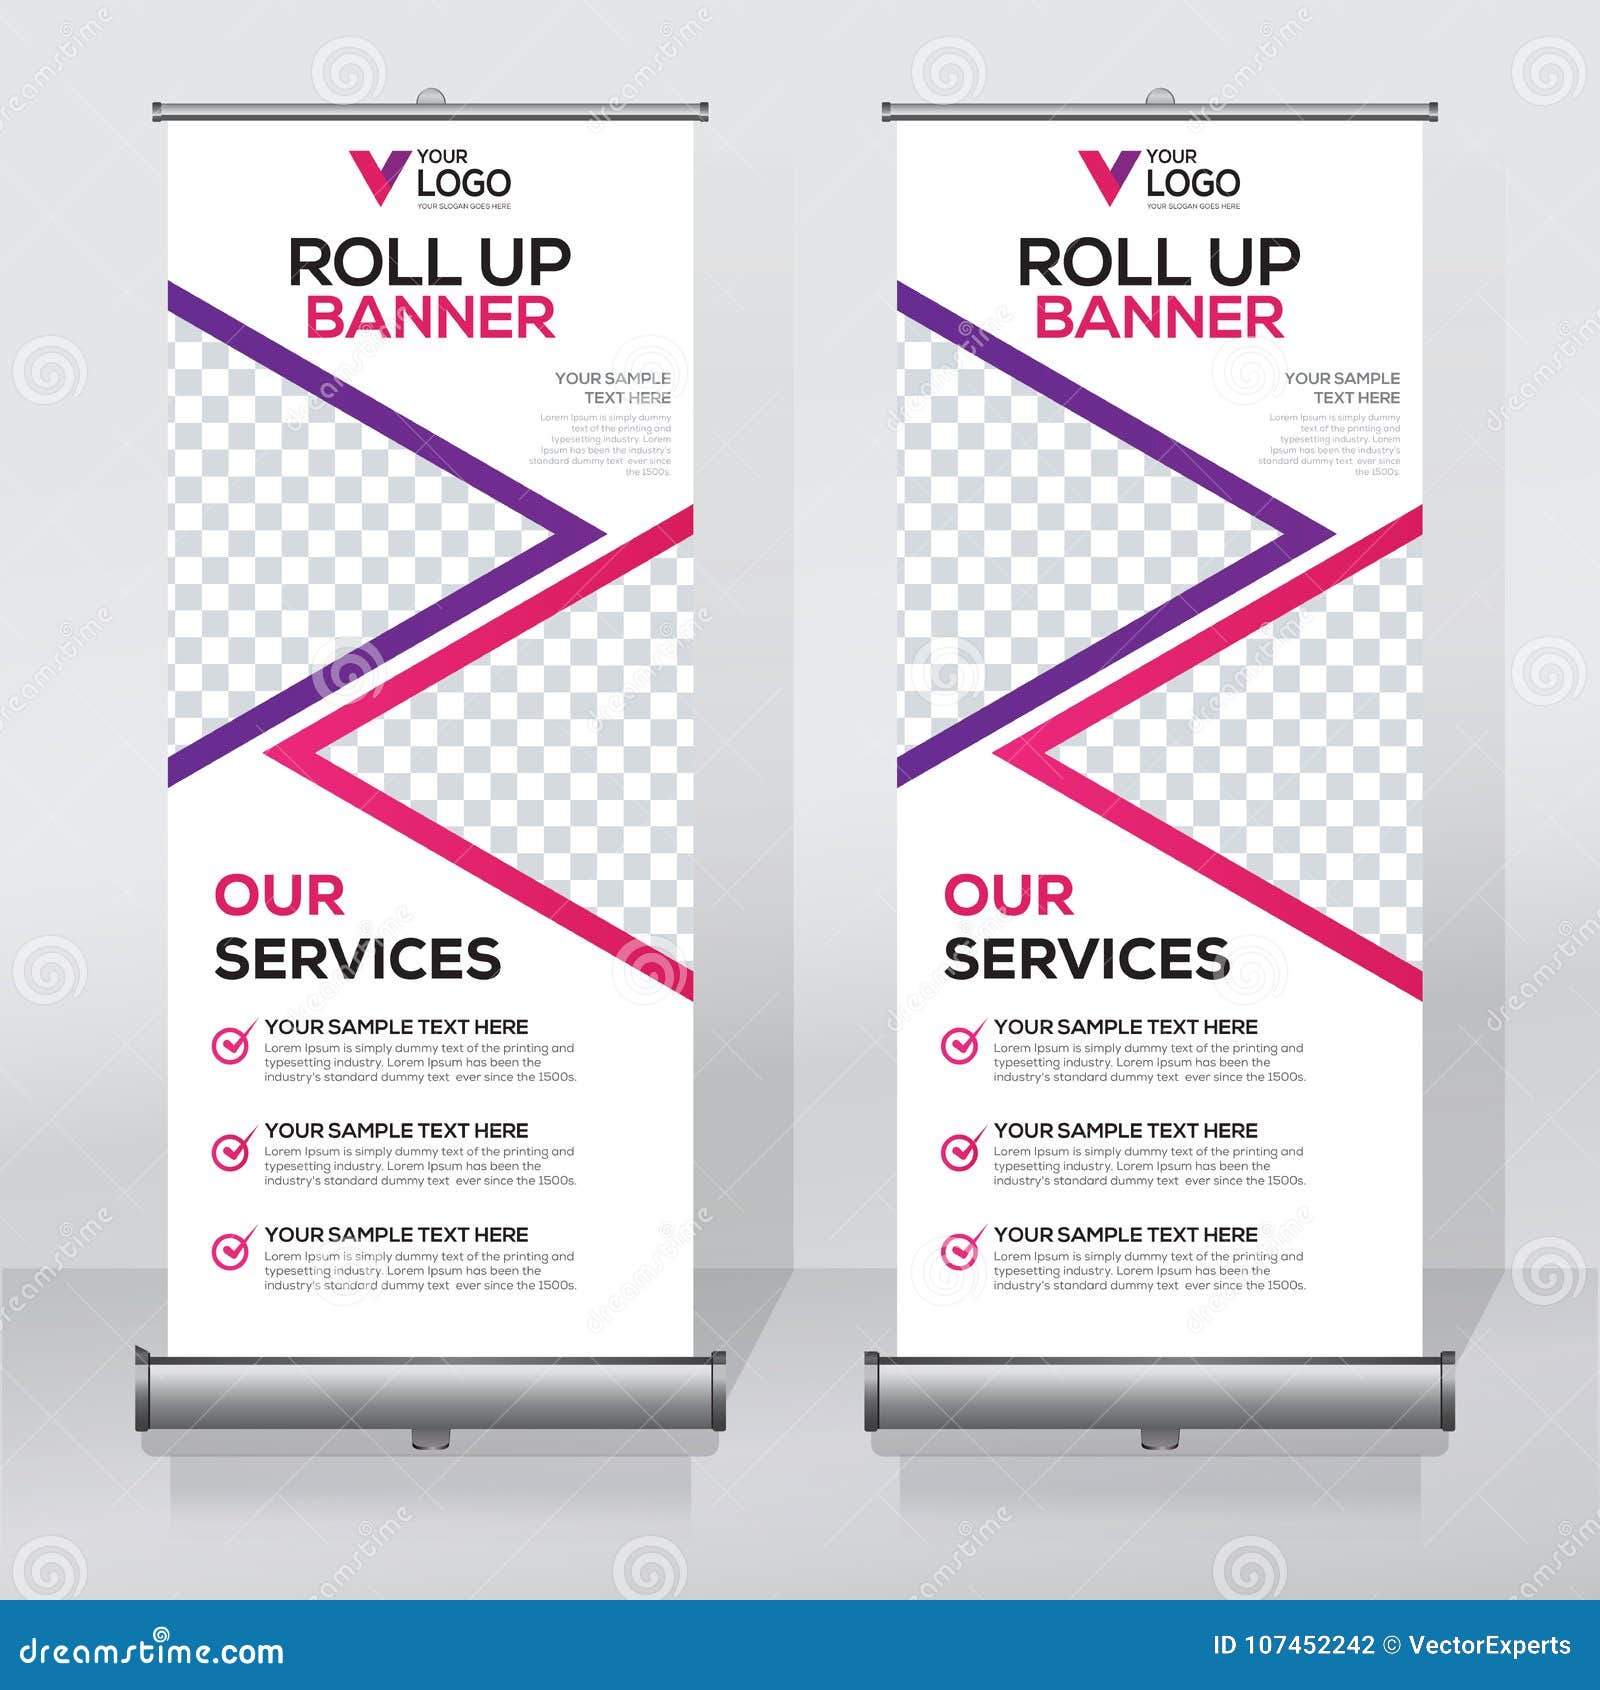 Roll Up Banner Design Template Vertical Abstract Background Pull Up Design Modern X Banner Rectangle Size Stock Vector Illustration Of Banners Card